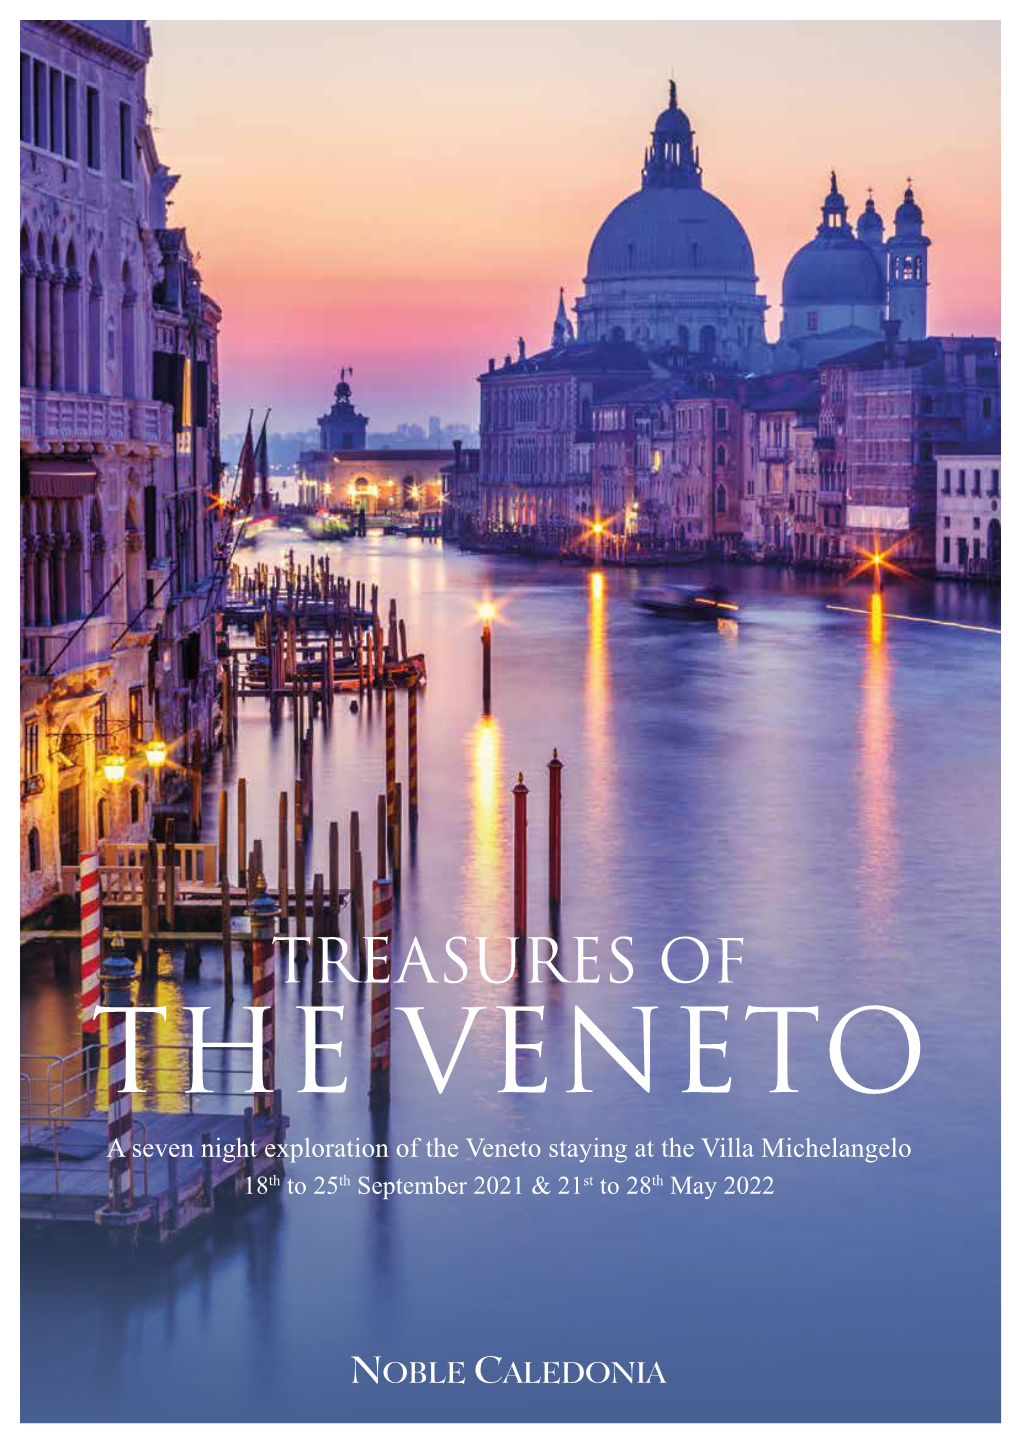 THE VENETO a Seven Night Exploration of the Veneto Staying at the Villa Michelangelo 18Th to 25Th September 2021 & 21St to 28Th May 2022 the Picturesque Town of Asolo